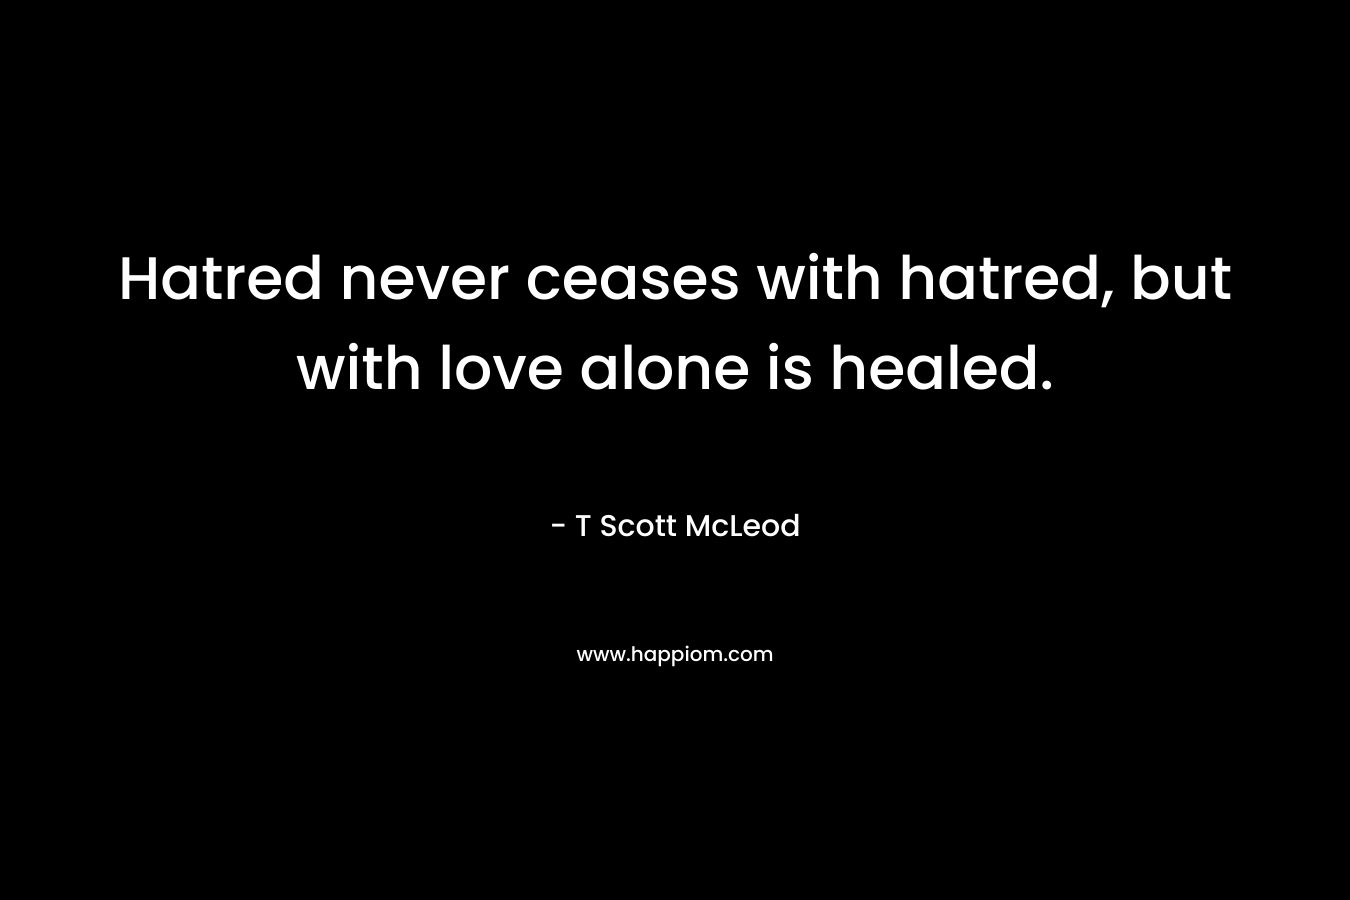 Hatred never ceases with hatred, but with love alone is healed. – T Scott McLeod